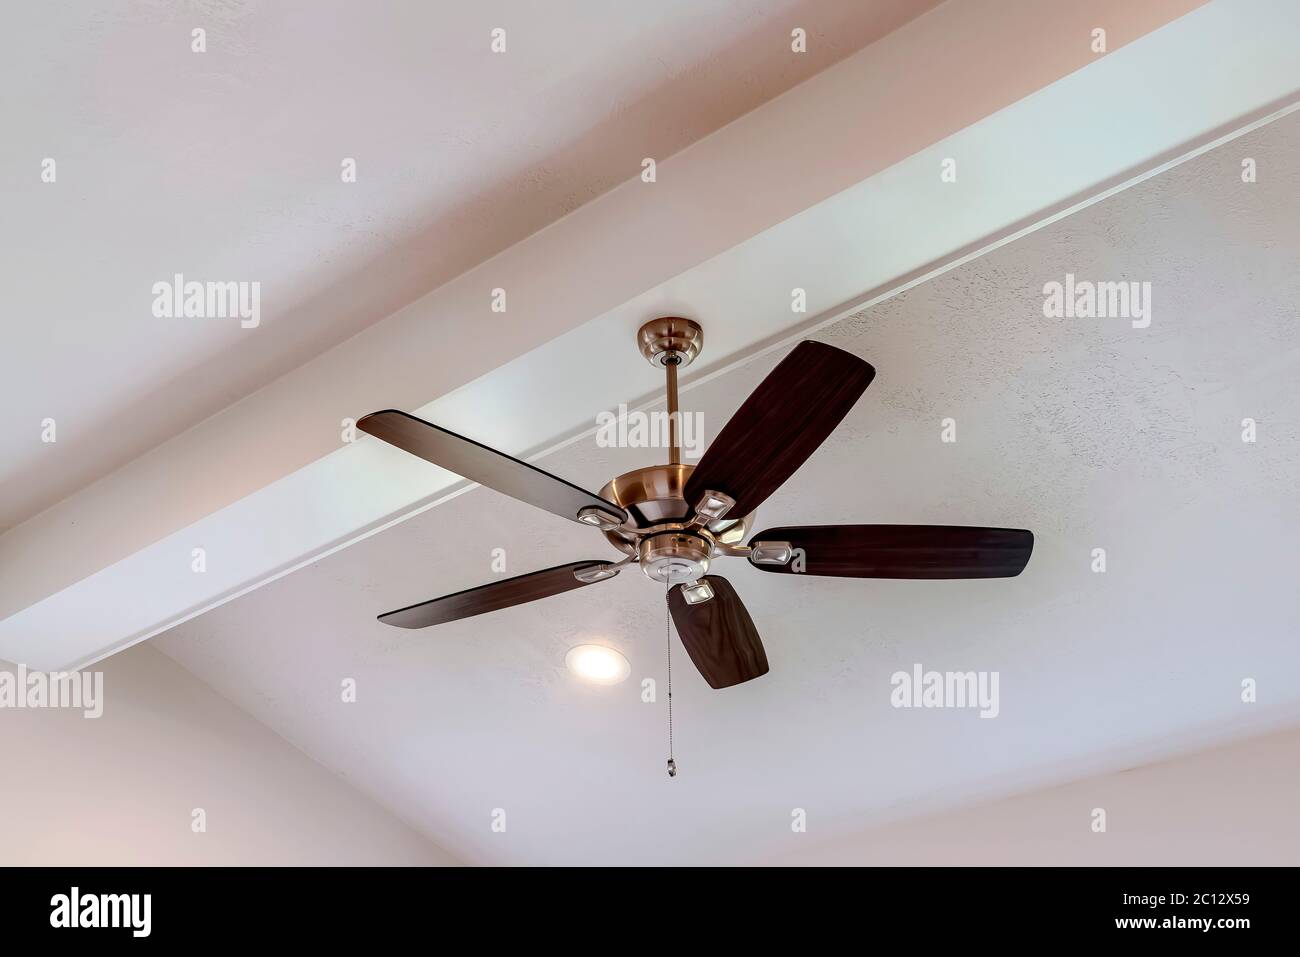 Decorative wood beam with standard ceiling fan and lights inside a house Stock Photo